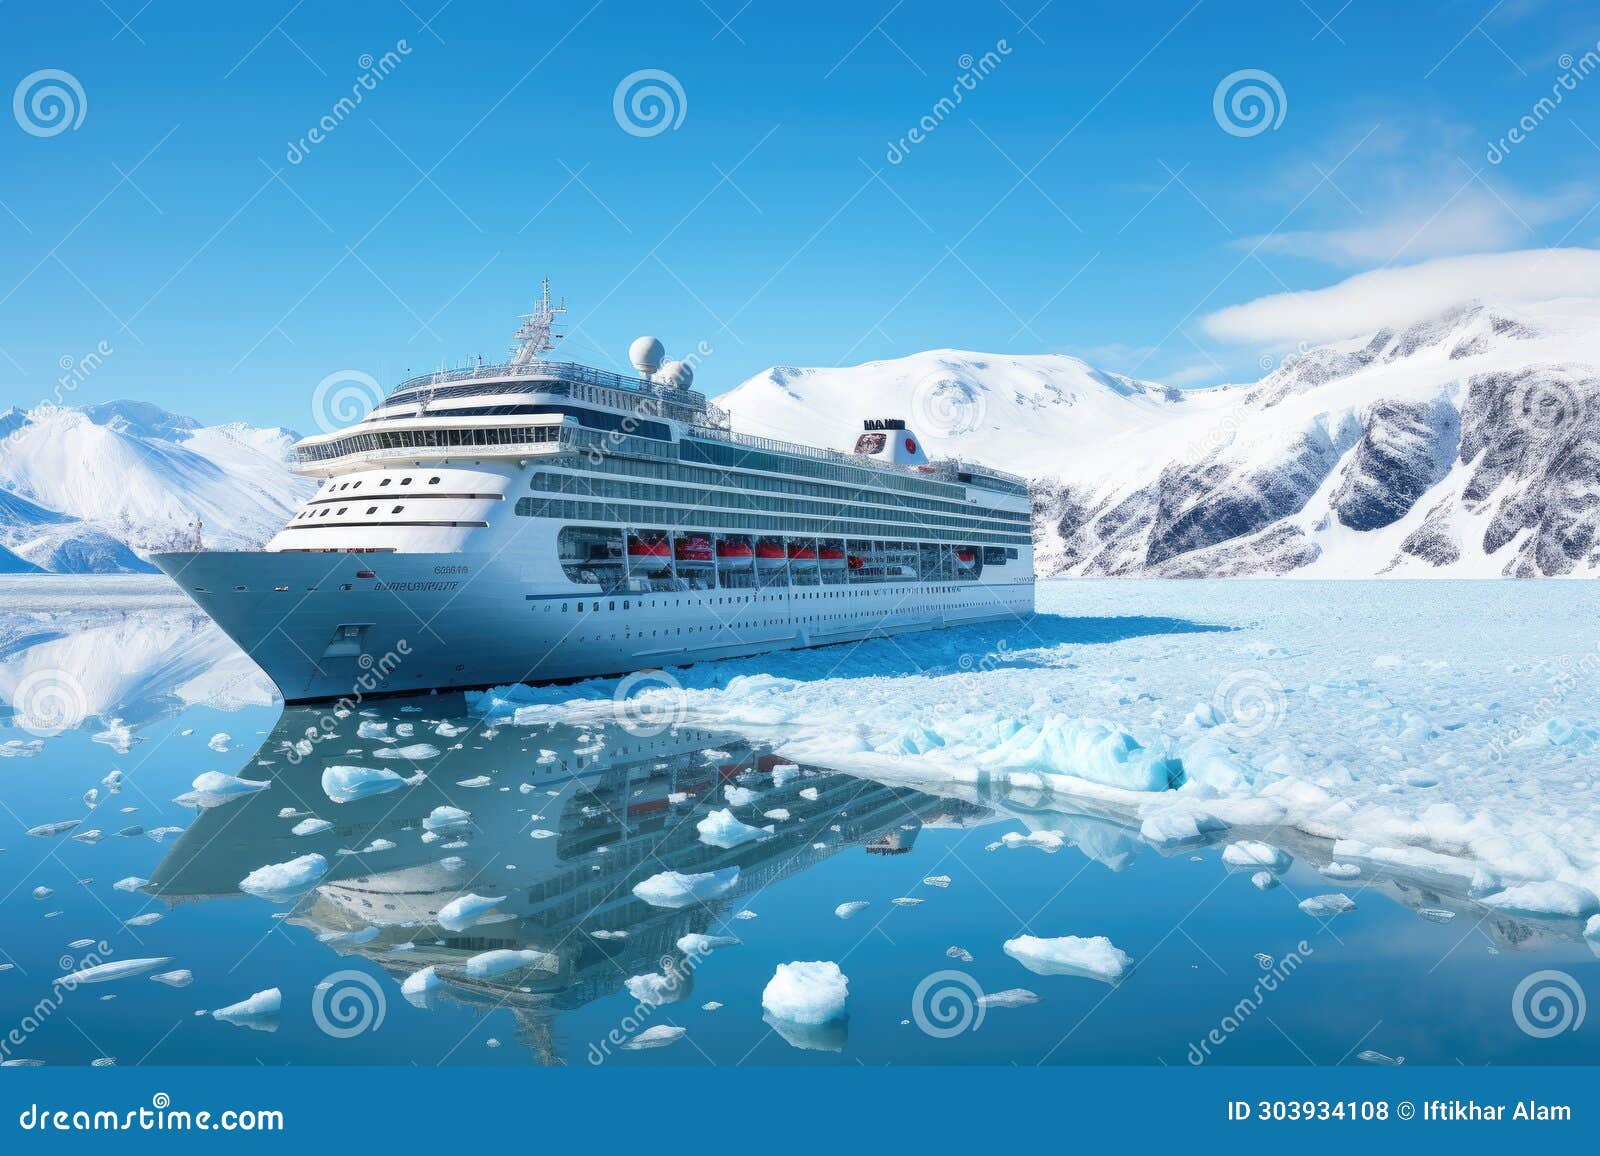 a cruise ship makes its way through a seemingly perilous journey surrounded by icebergs, cruise ship in majestic north seascape